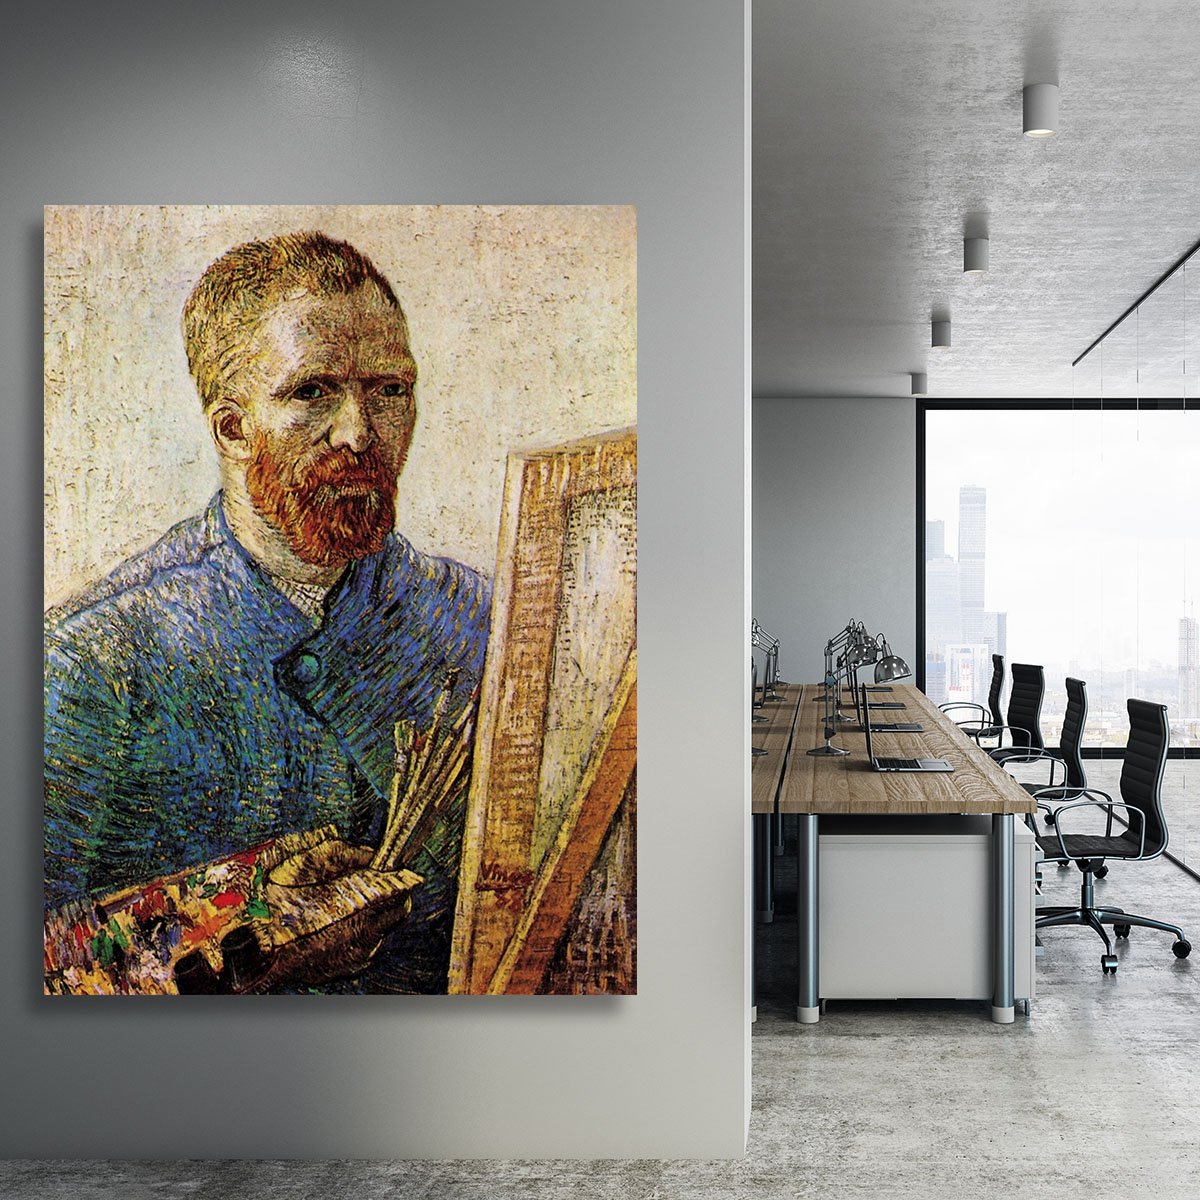 Self-Portrait in Front of the Easel by Van Gogh Canvas Print or Poster